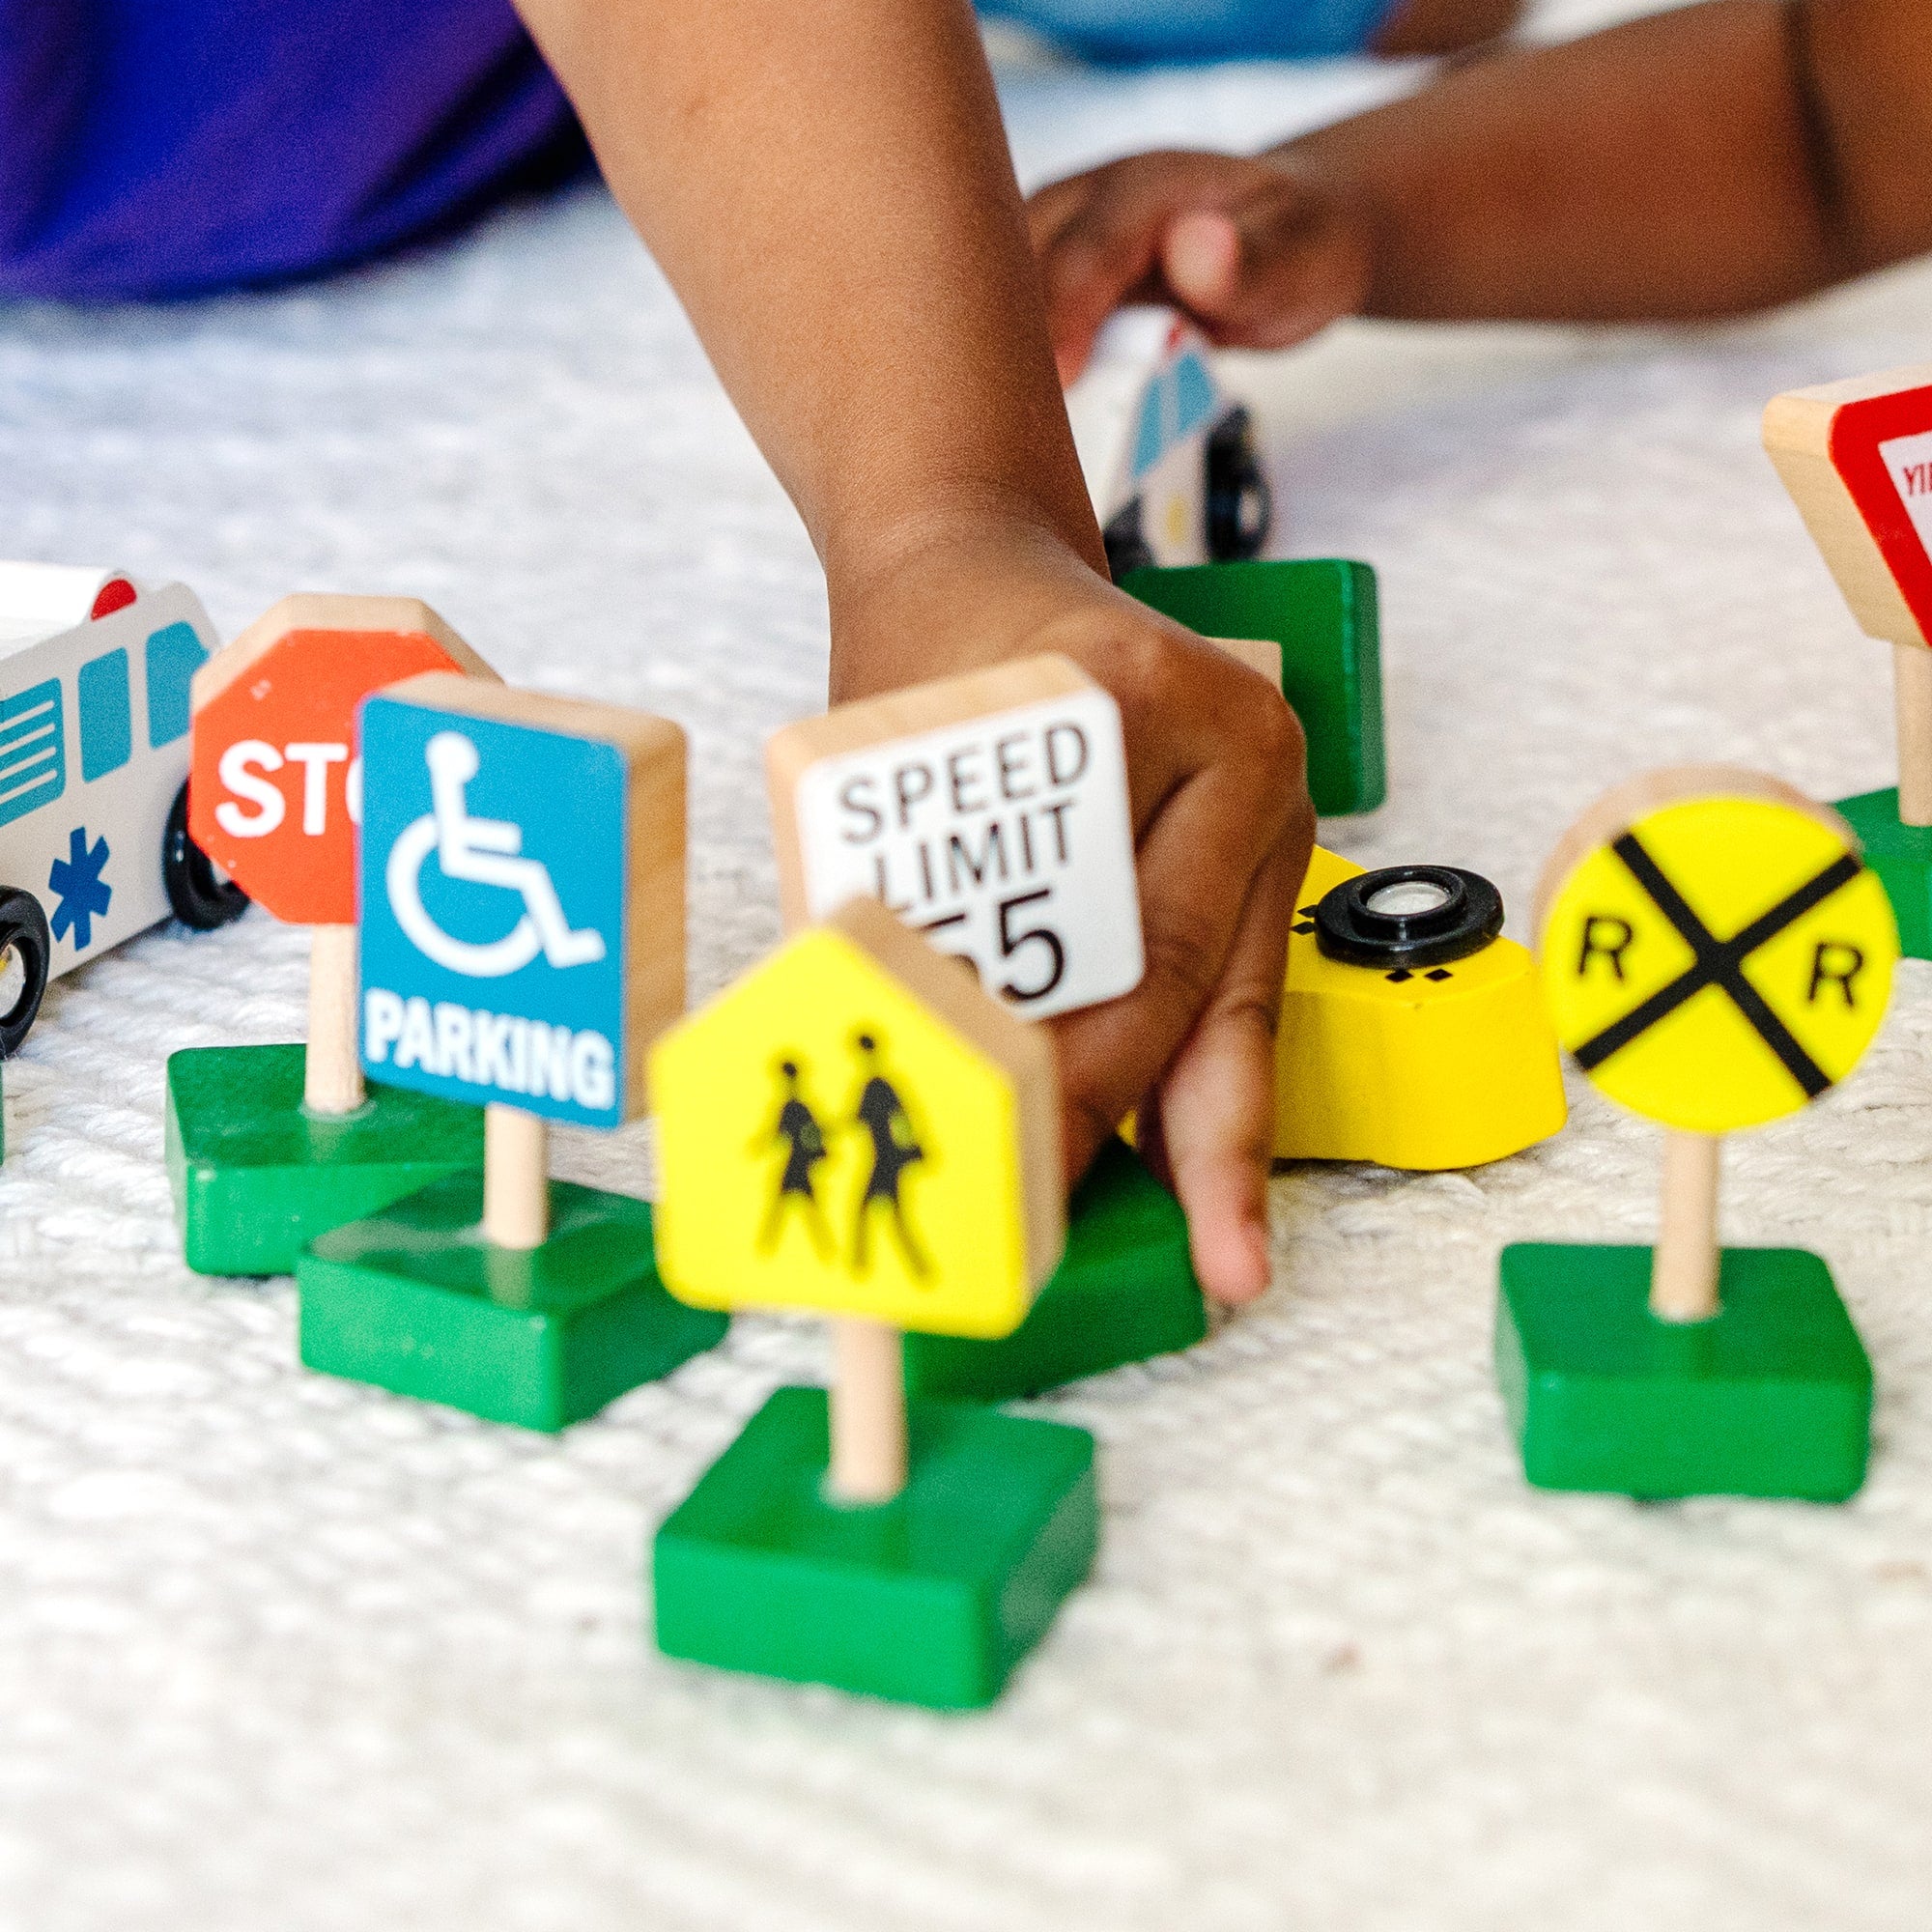 Melissa & Doug Wooden Vehicles and Traffic Signs - 3177